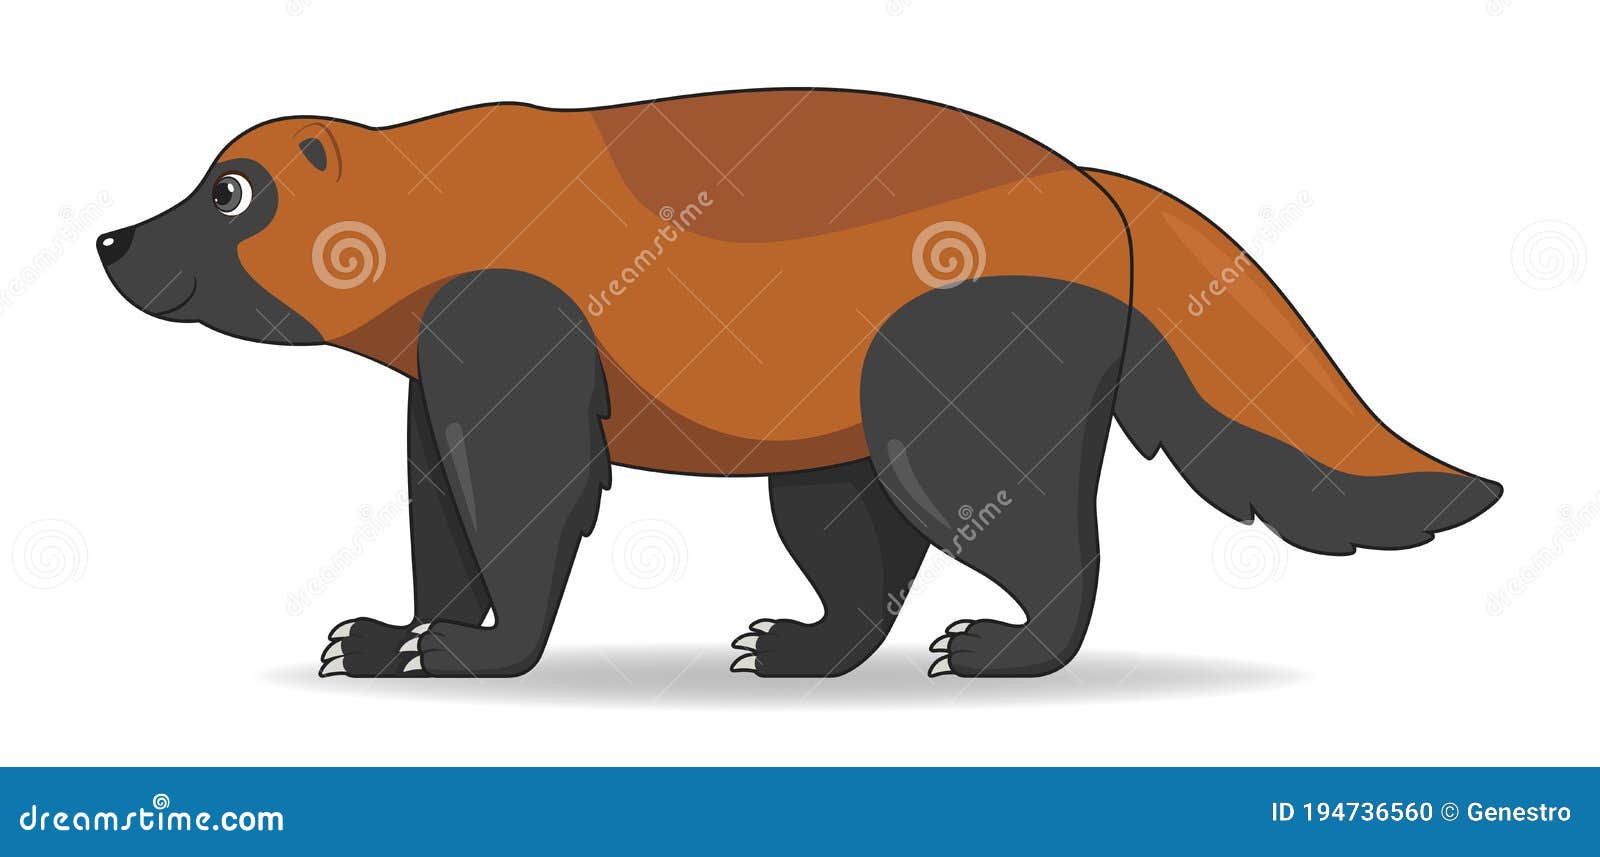 Wolverine Animal Standing on a White Background Stock Vector - Illustration  of animals, vector: 194736560